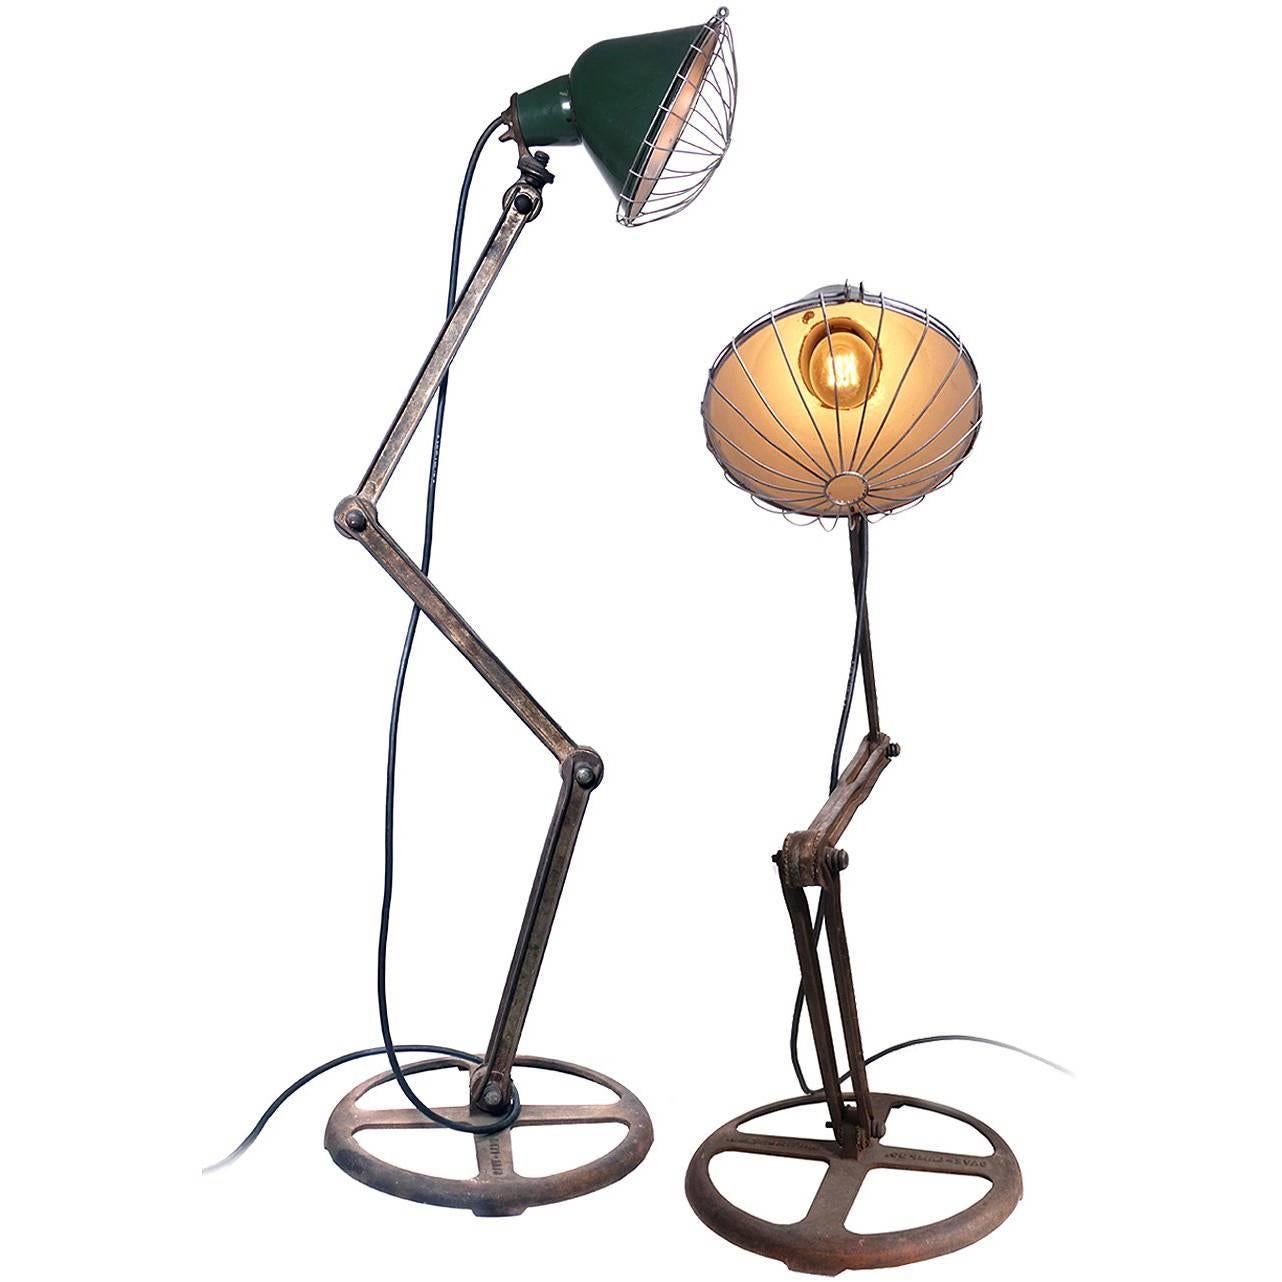 Matching Pair of Save-Light Industrial Floor Lamps